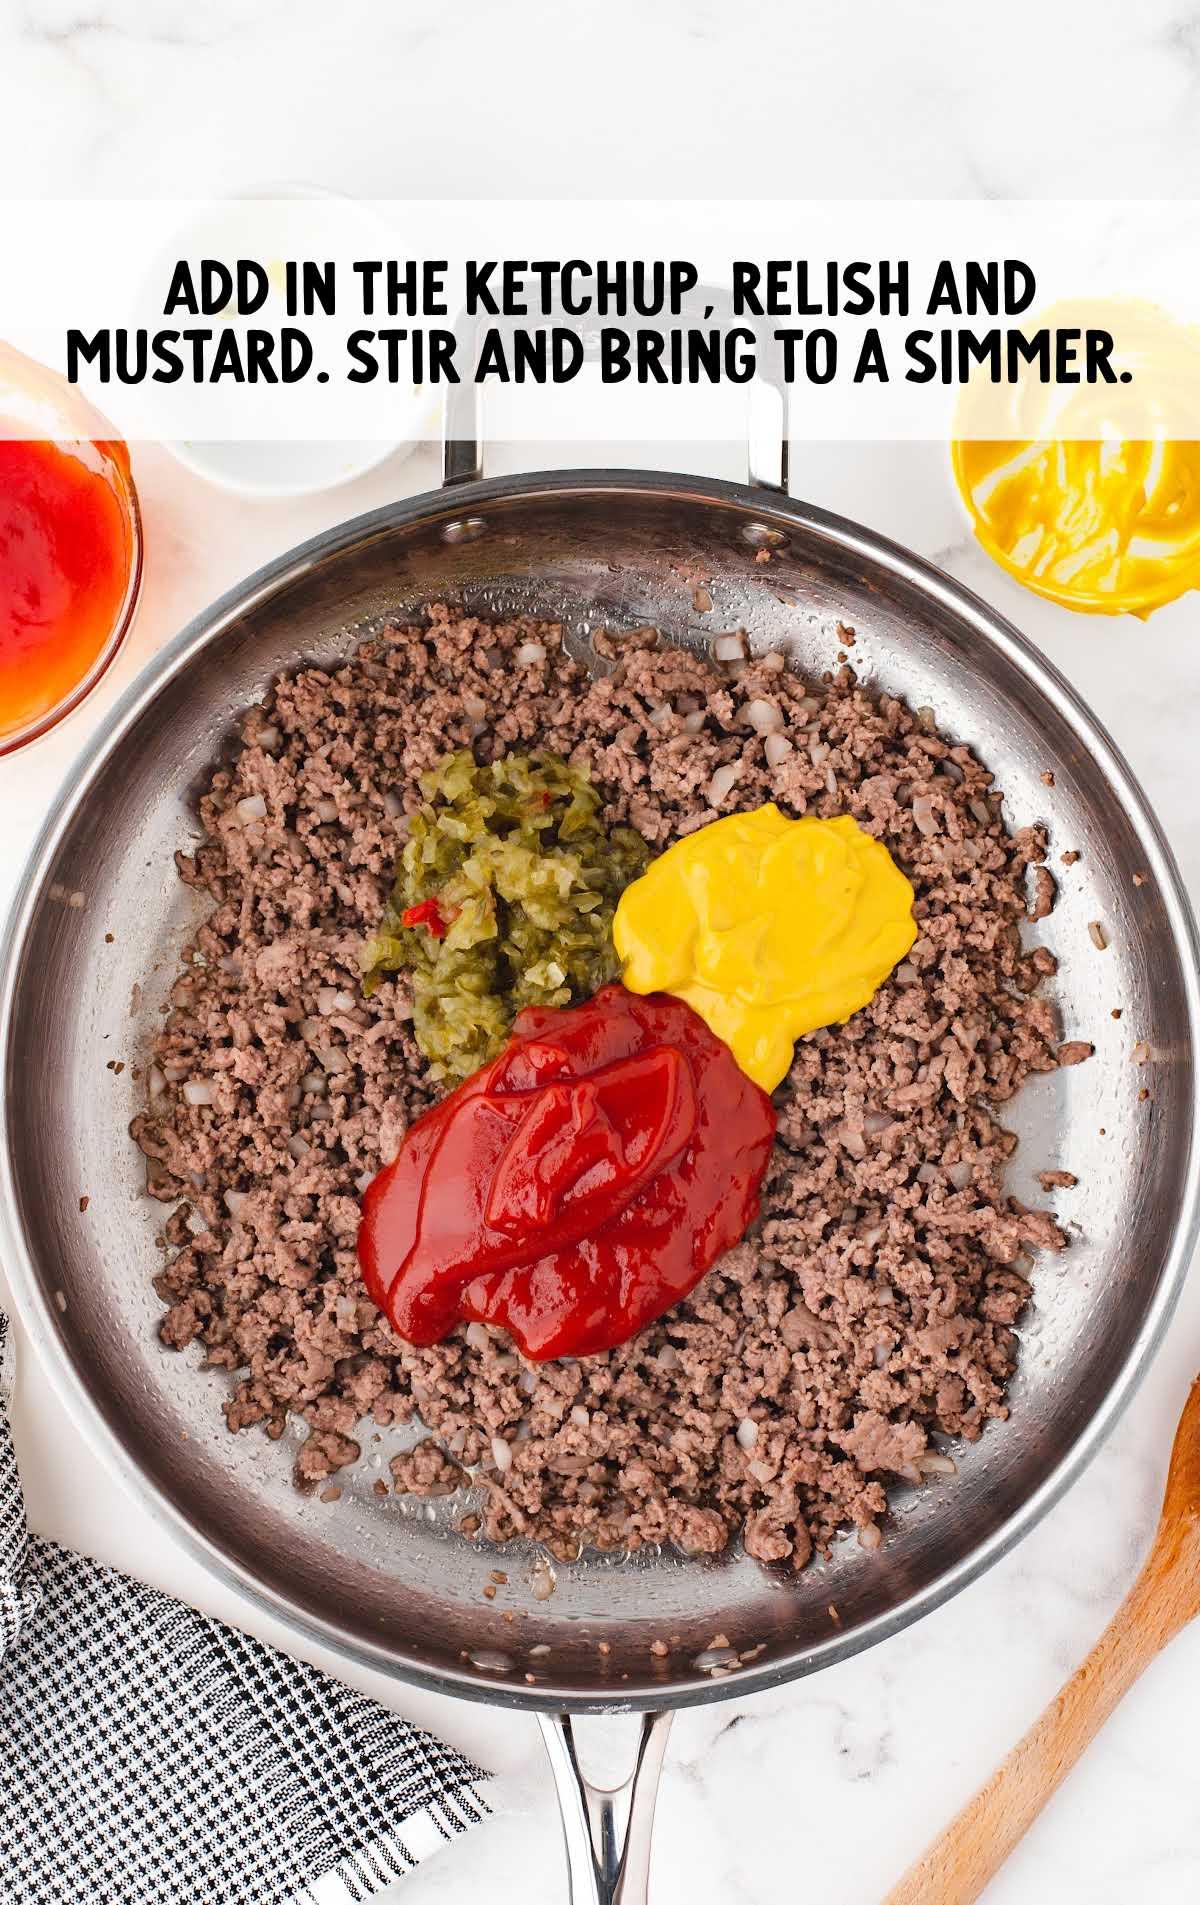 ketchup, relish, and mustard added to to a skillet and stirred together